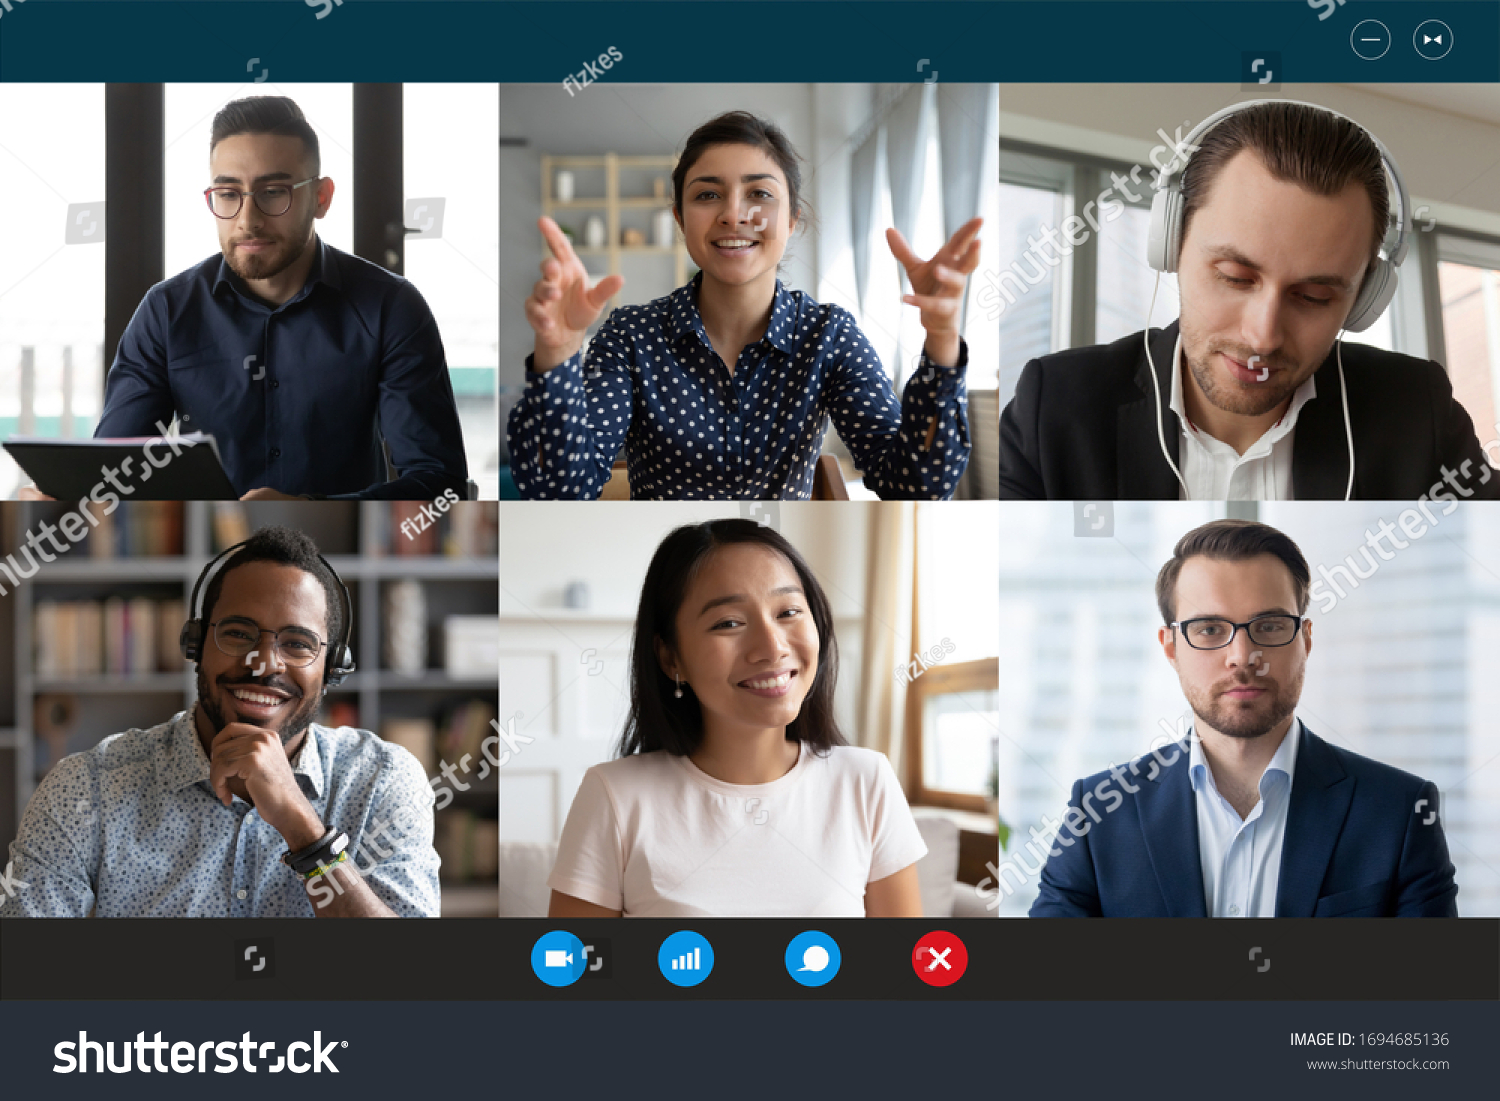 Team working by group video call share ideas brainstorming negotiating use video conference, pc screen view six multi ethnic young people, application advertisement easy and comfortable usage concept #1694685136